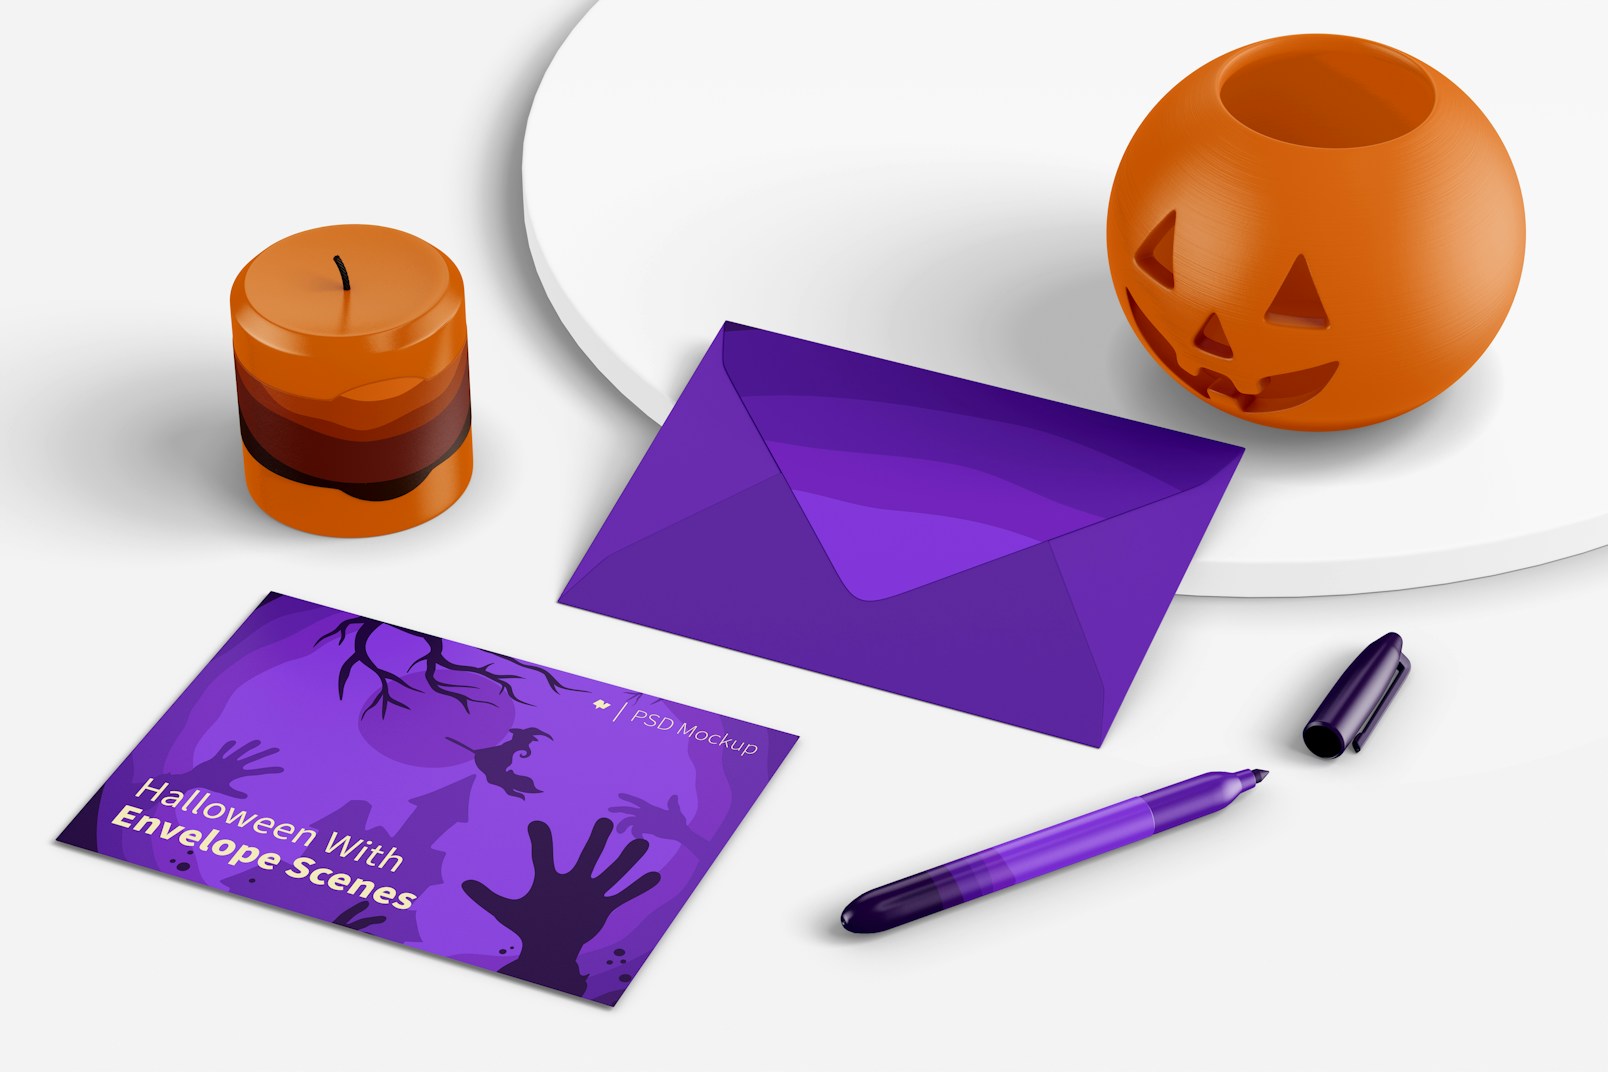 Halloween with Envelope Scene Mockup, on Surface